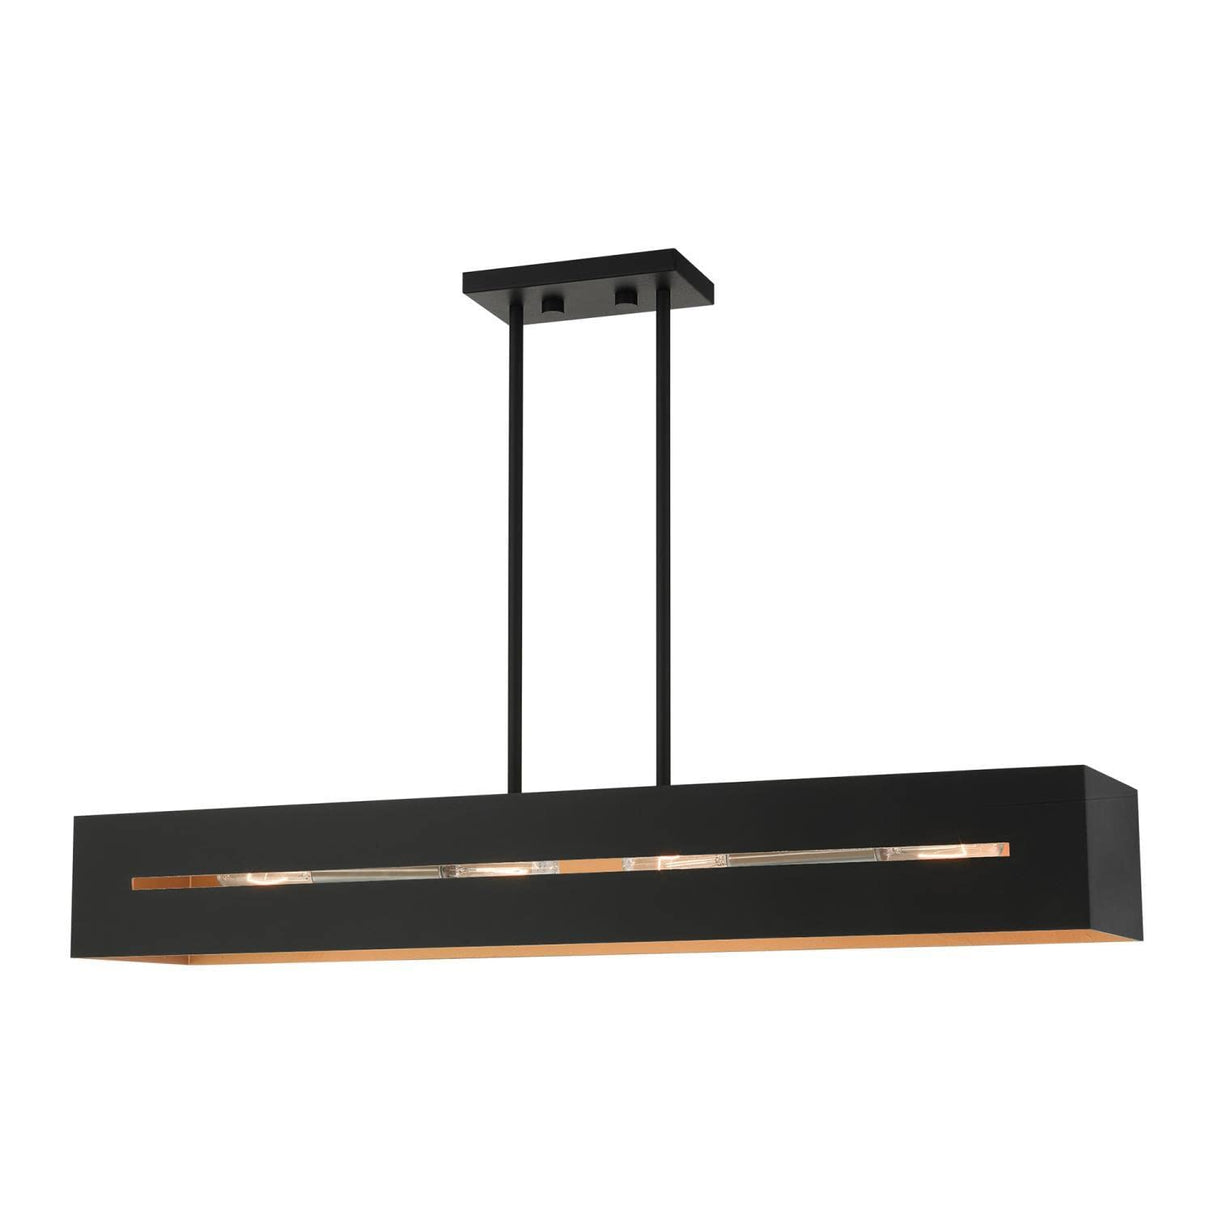 Livex Lighting 4 Lt Textured Black with Brushed Nickel Accents Linear Chandelier (45957-14), Medium